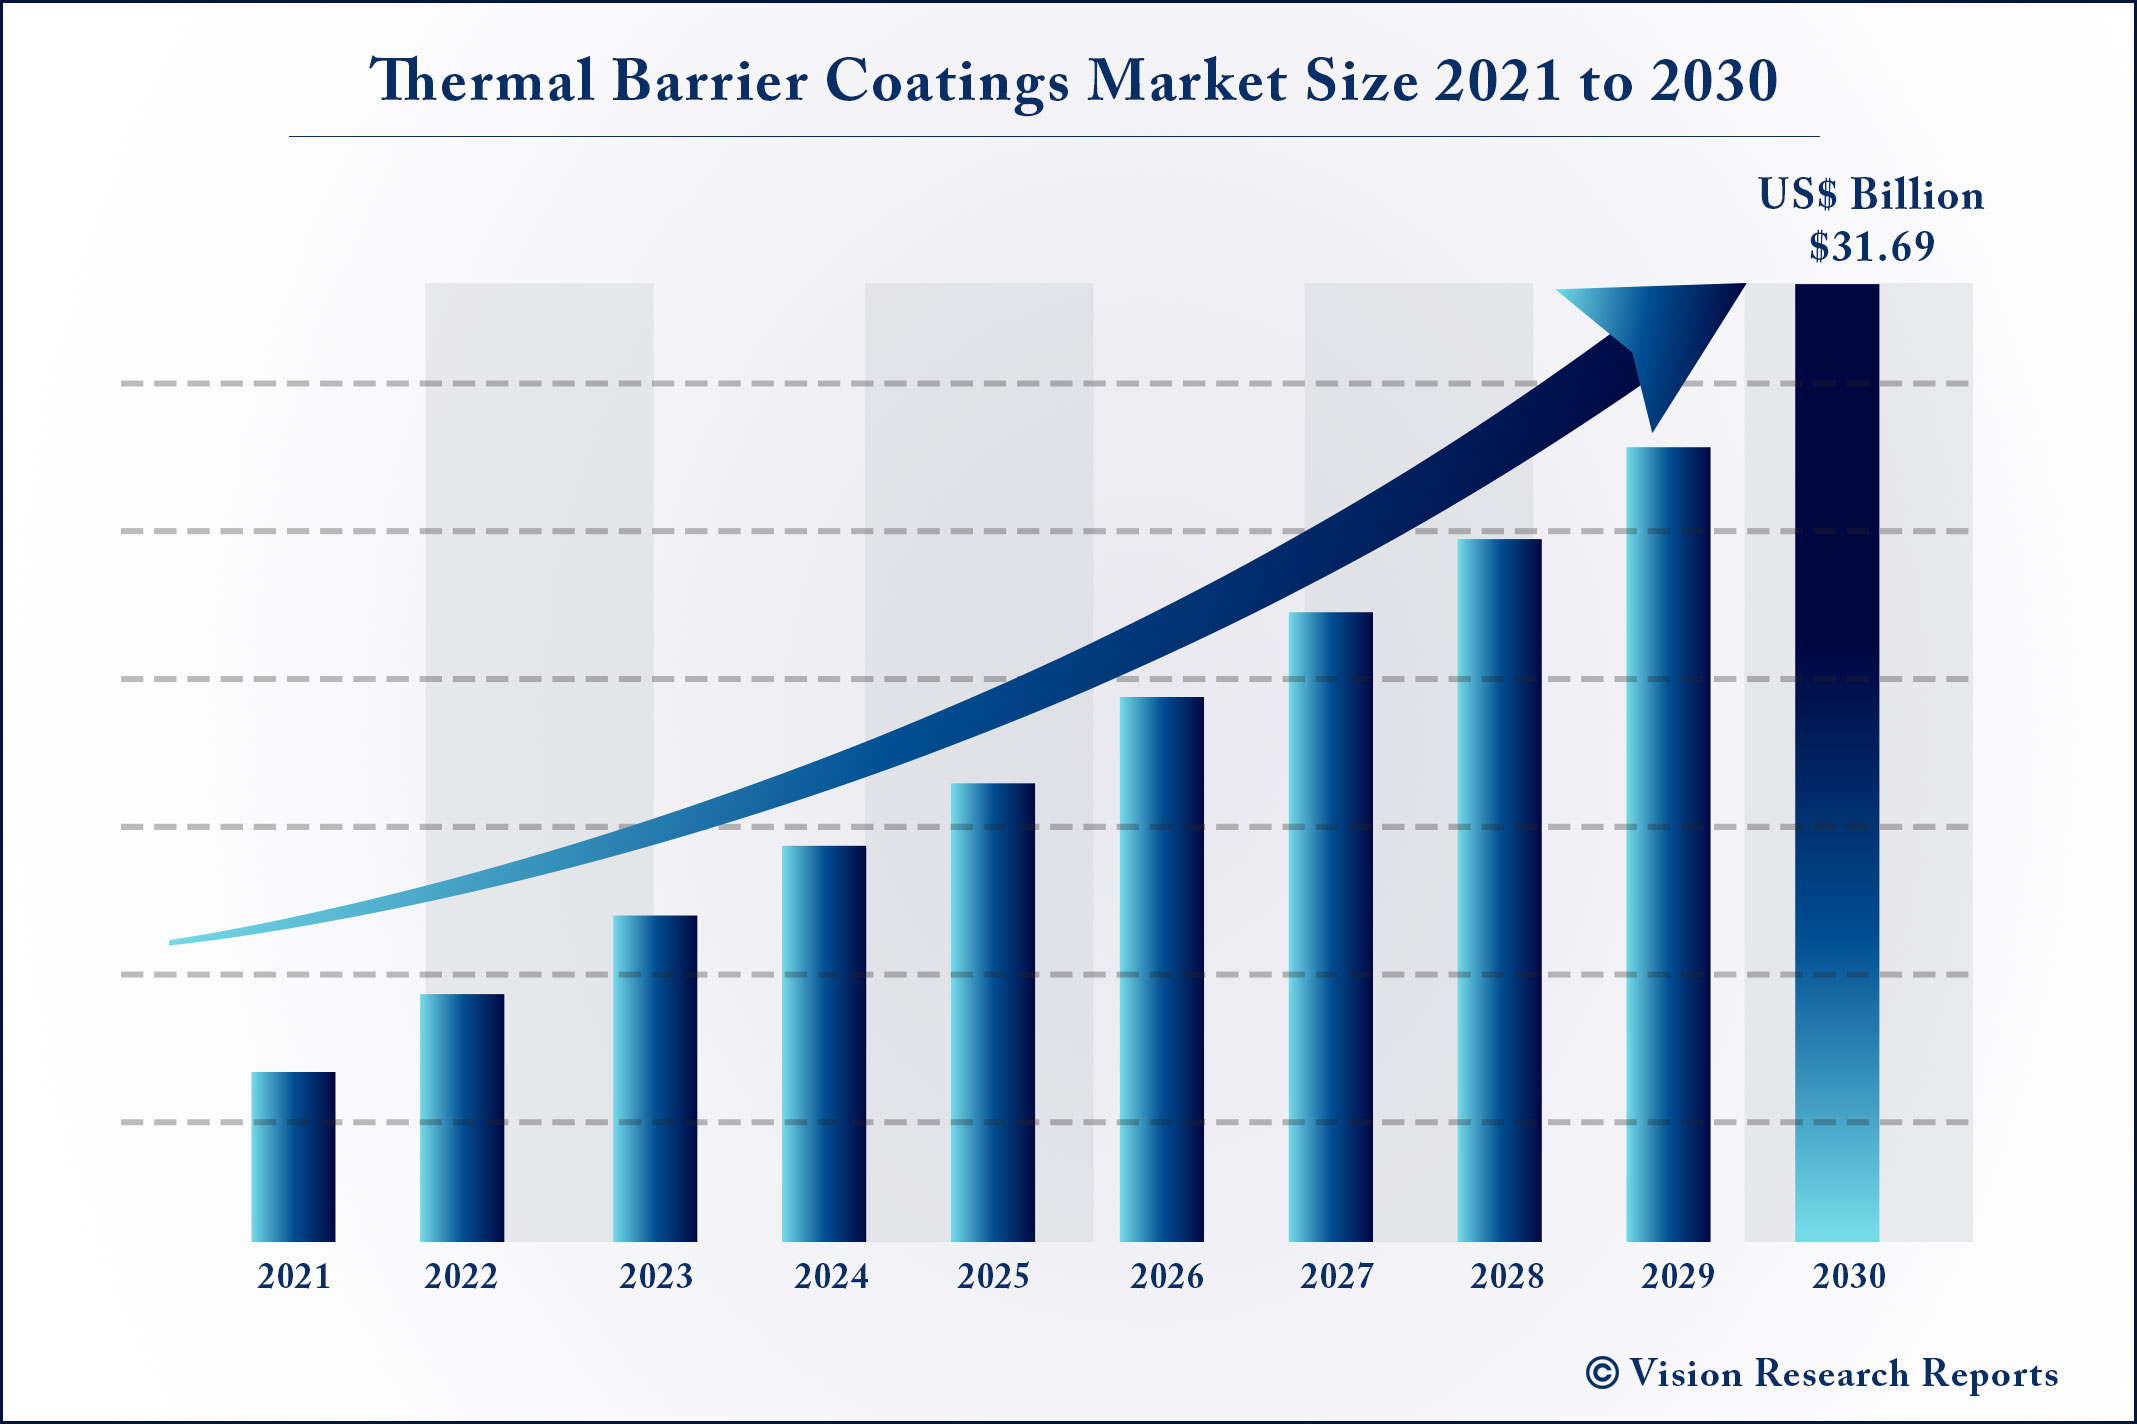 Thermal Barrier Coatings Market Size 2021 to 2030